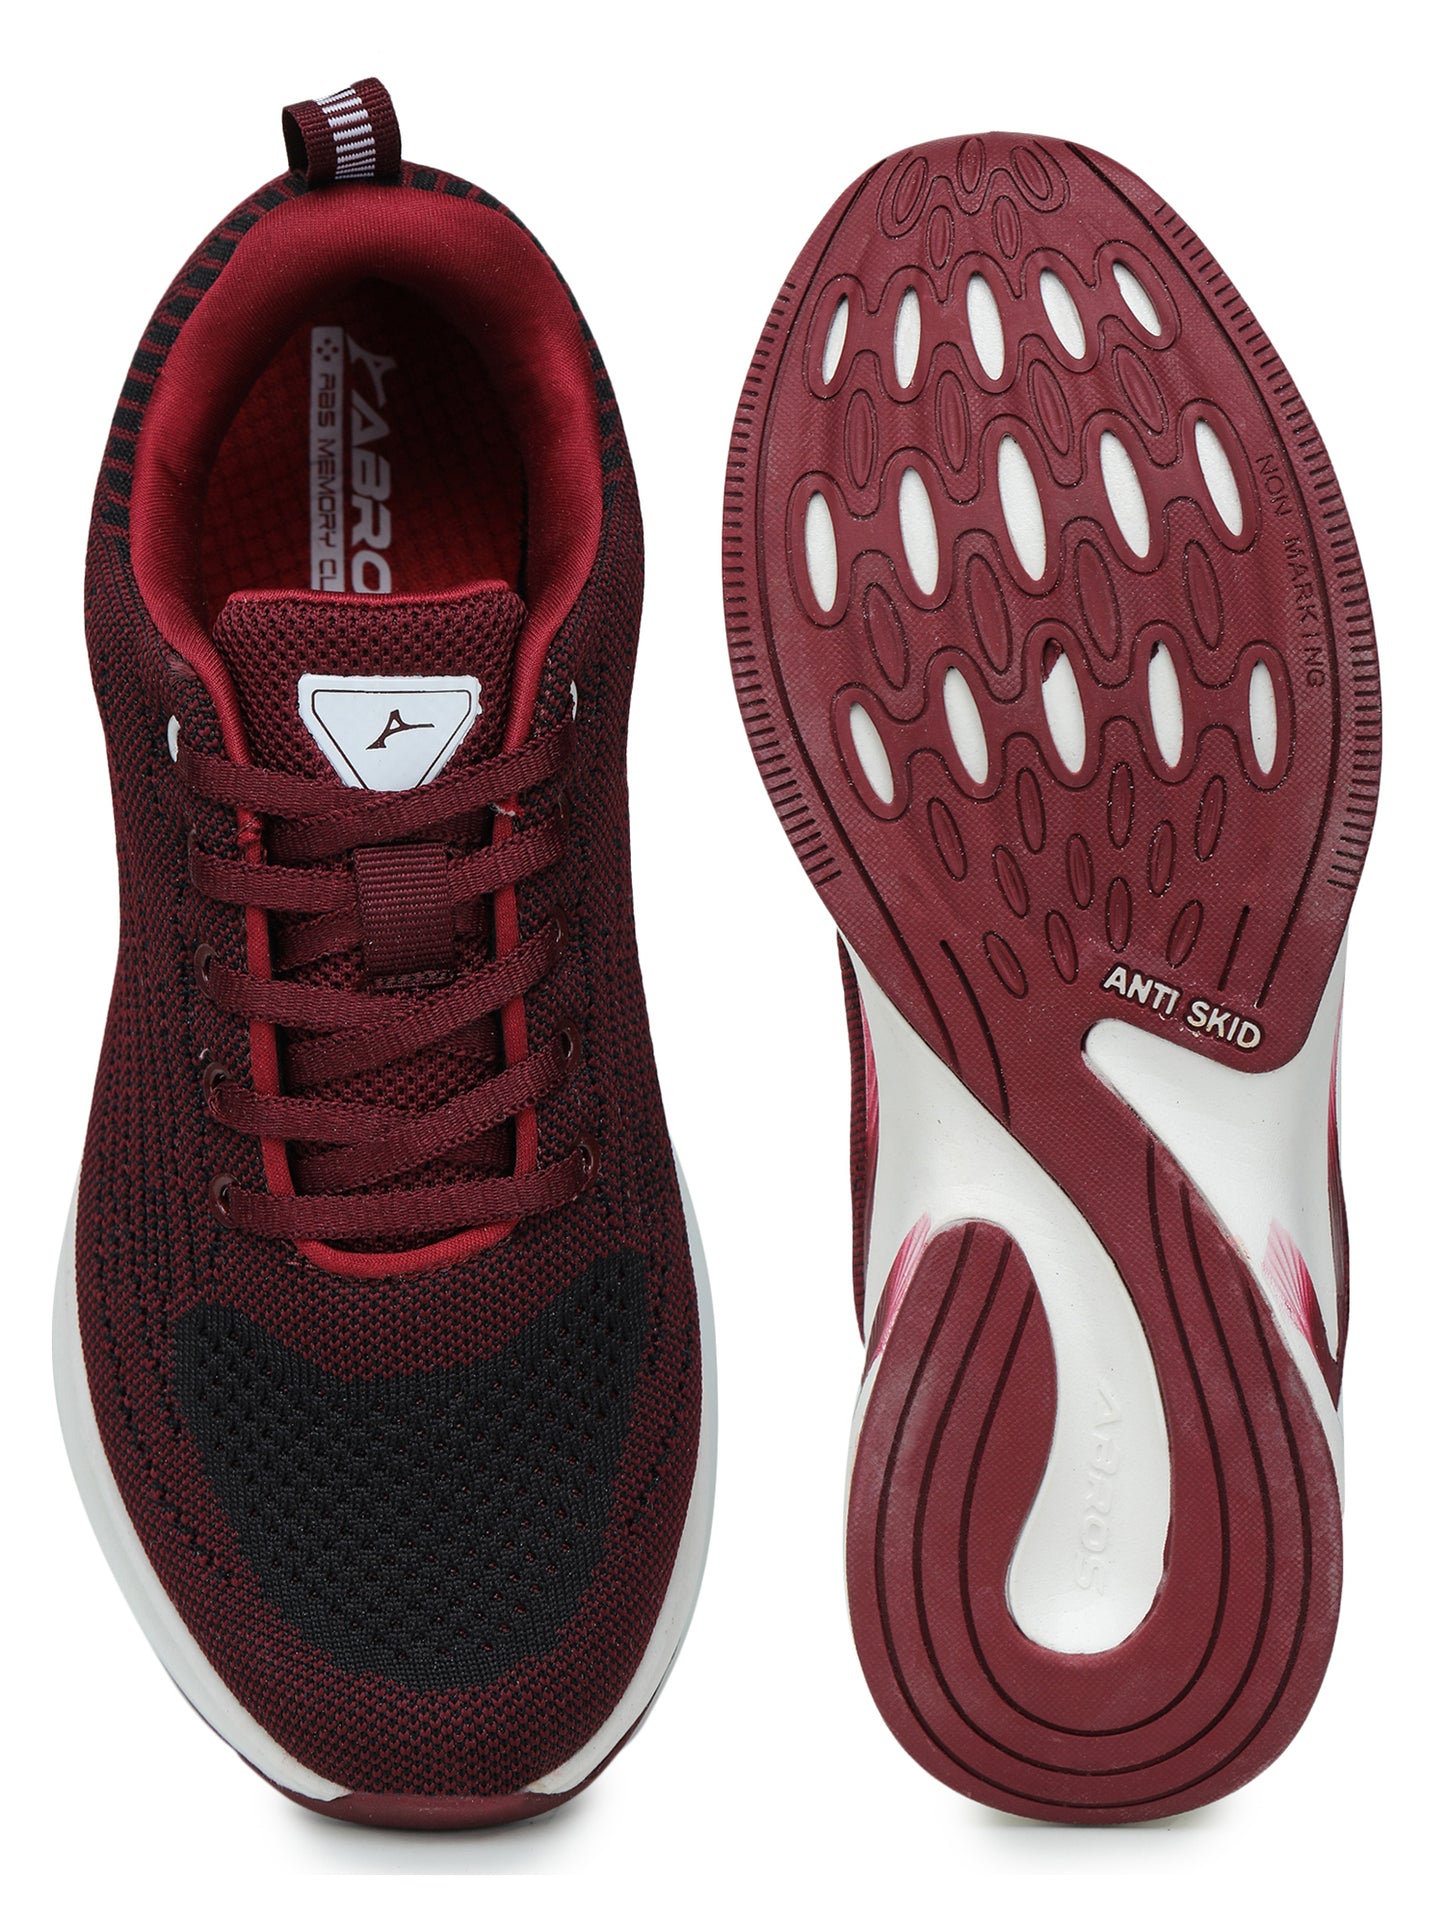 ABROS ULTIMATE SPORTS SHOES FOR MEN